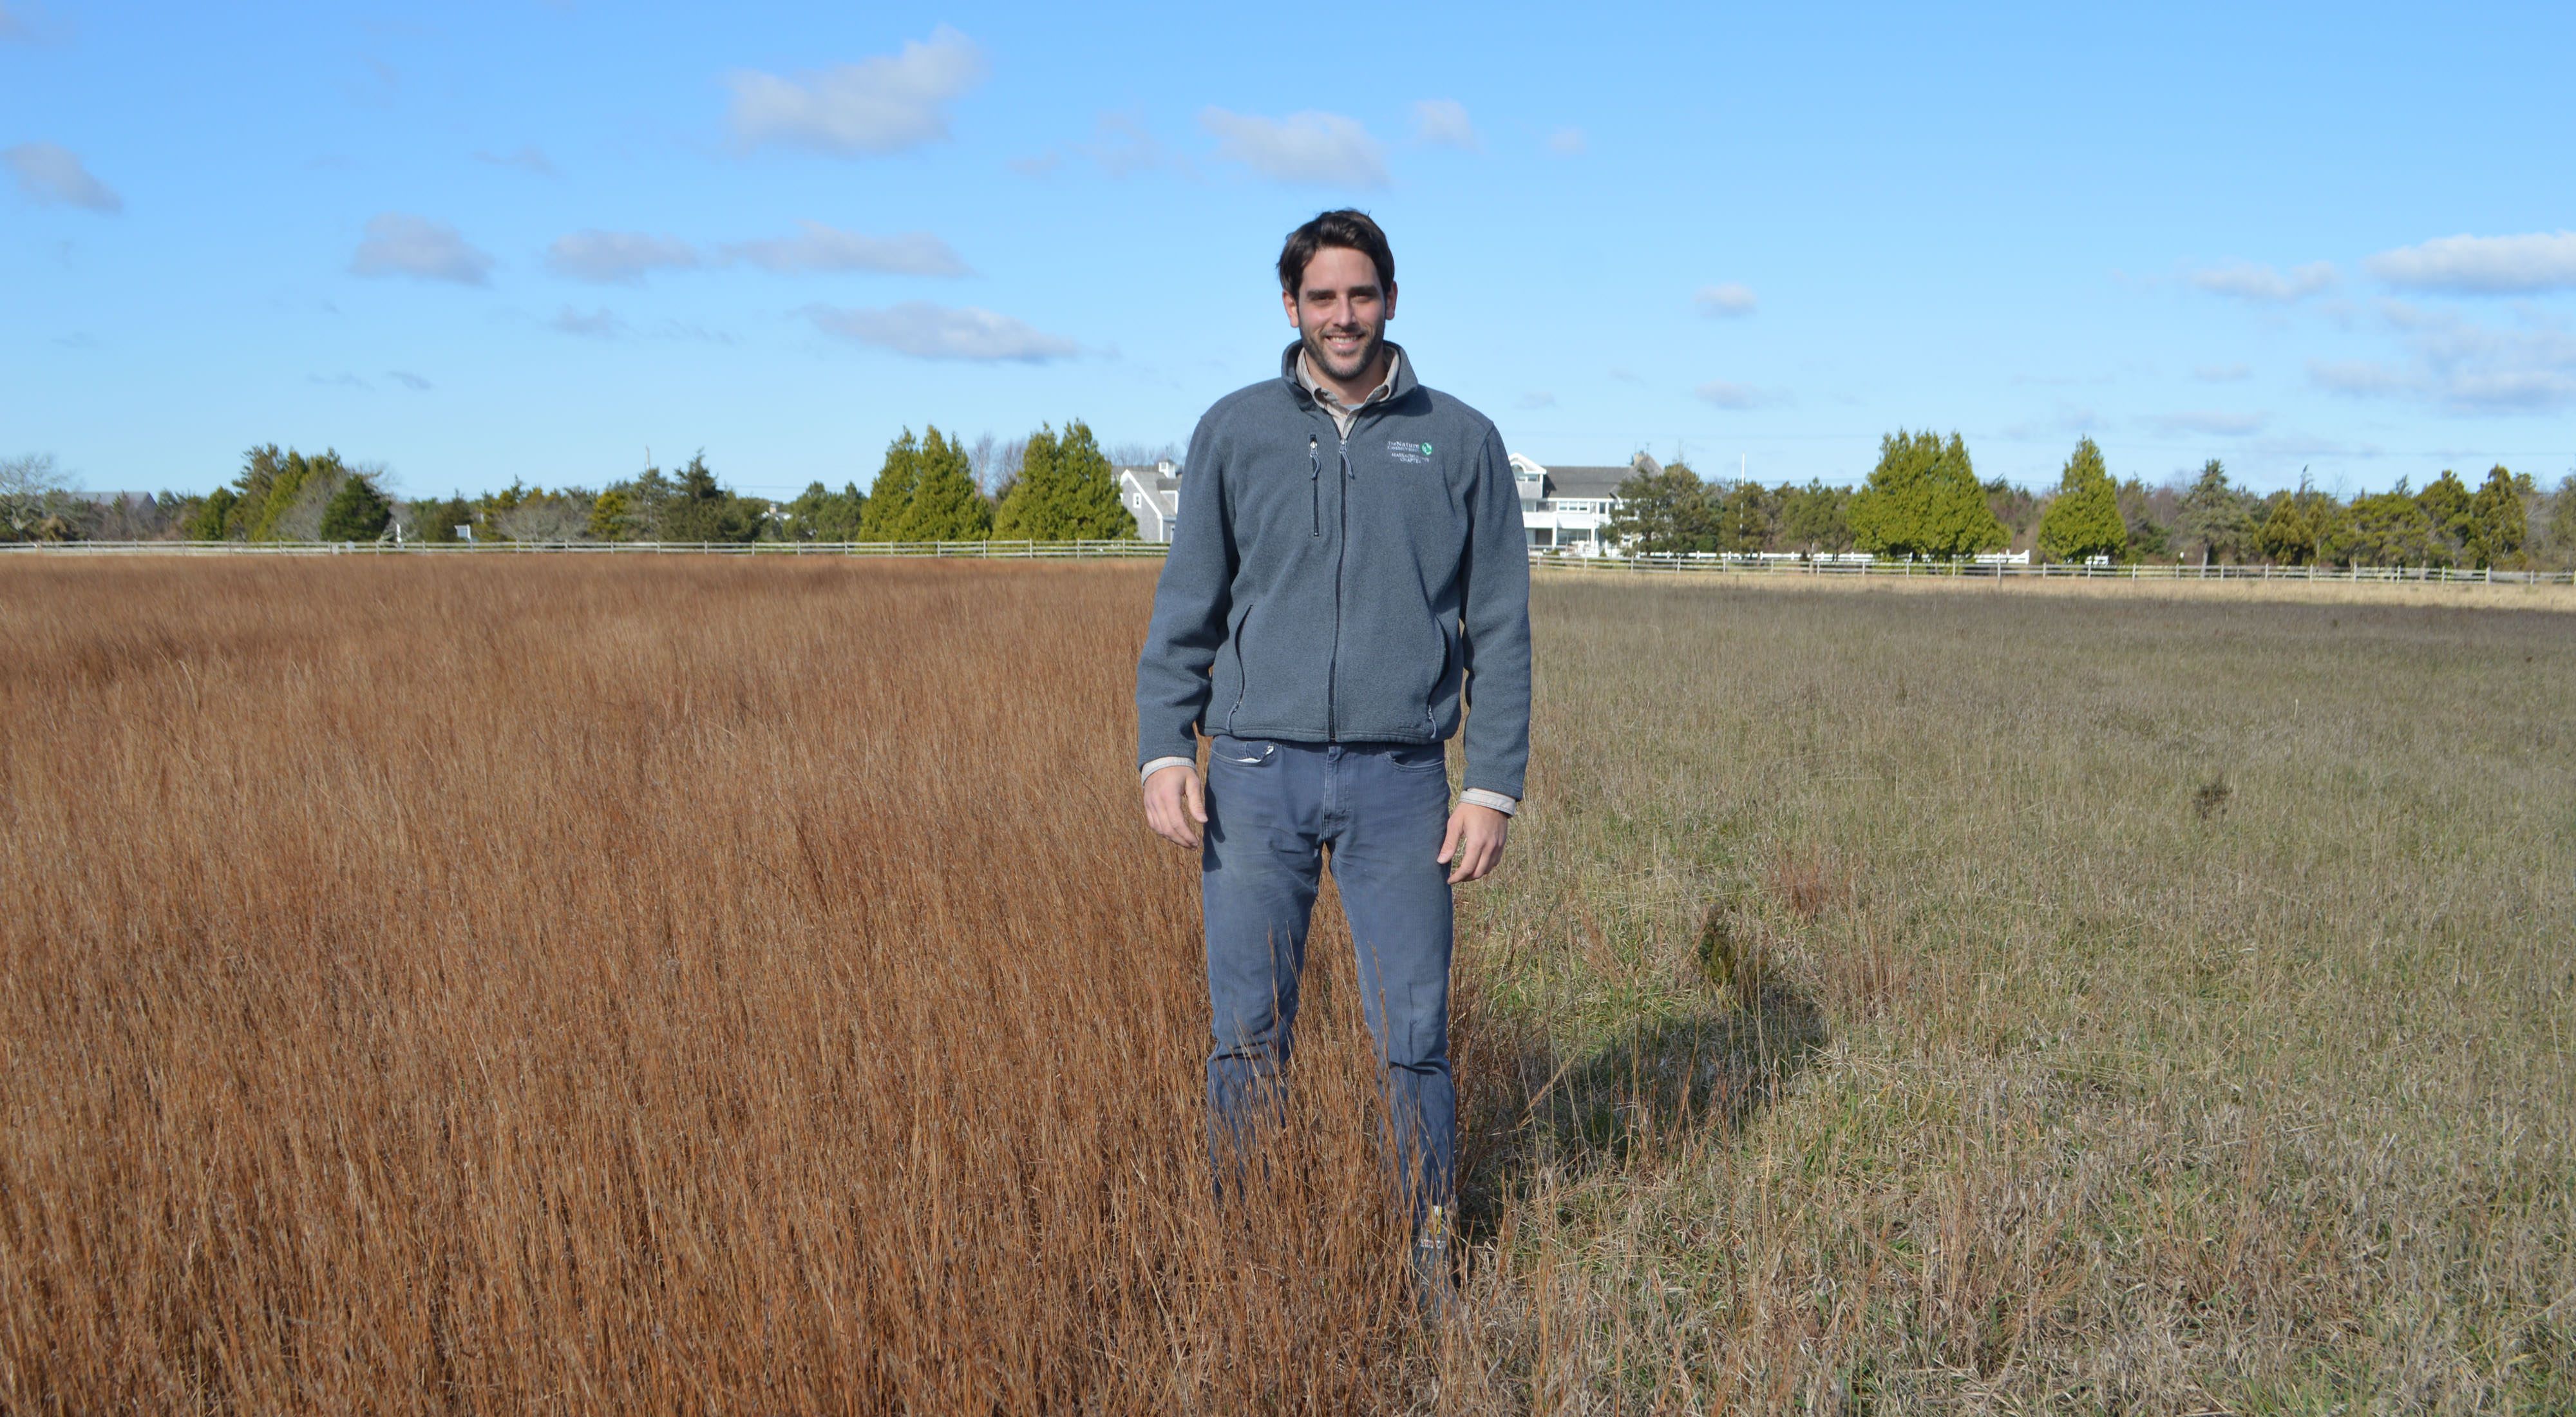 A man stands in a grassland on Martha's Vineyard, on the left side the grass is brown, on the right, it is green.